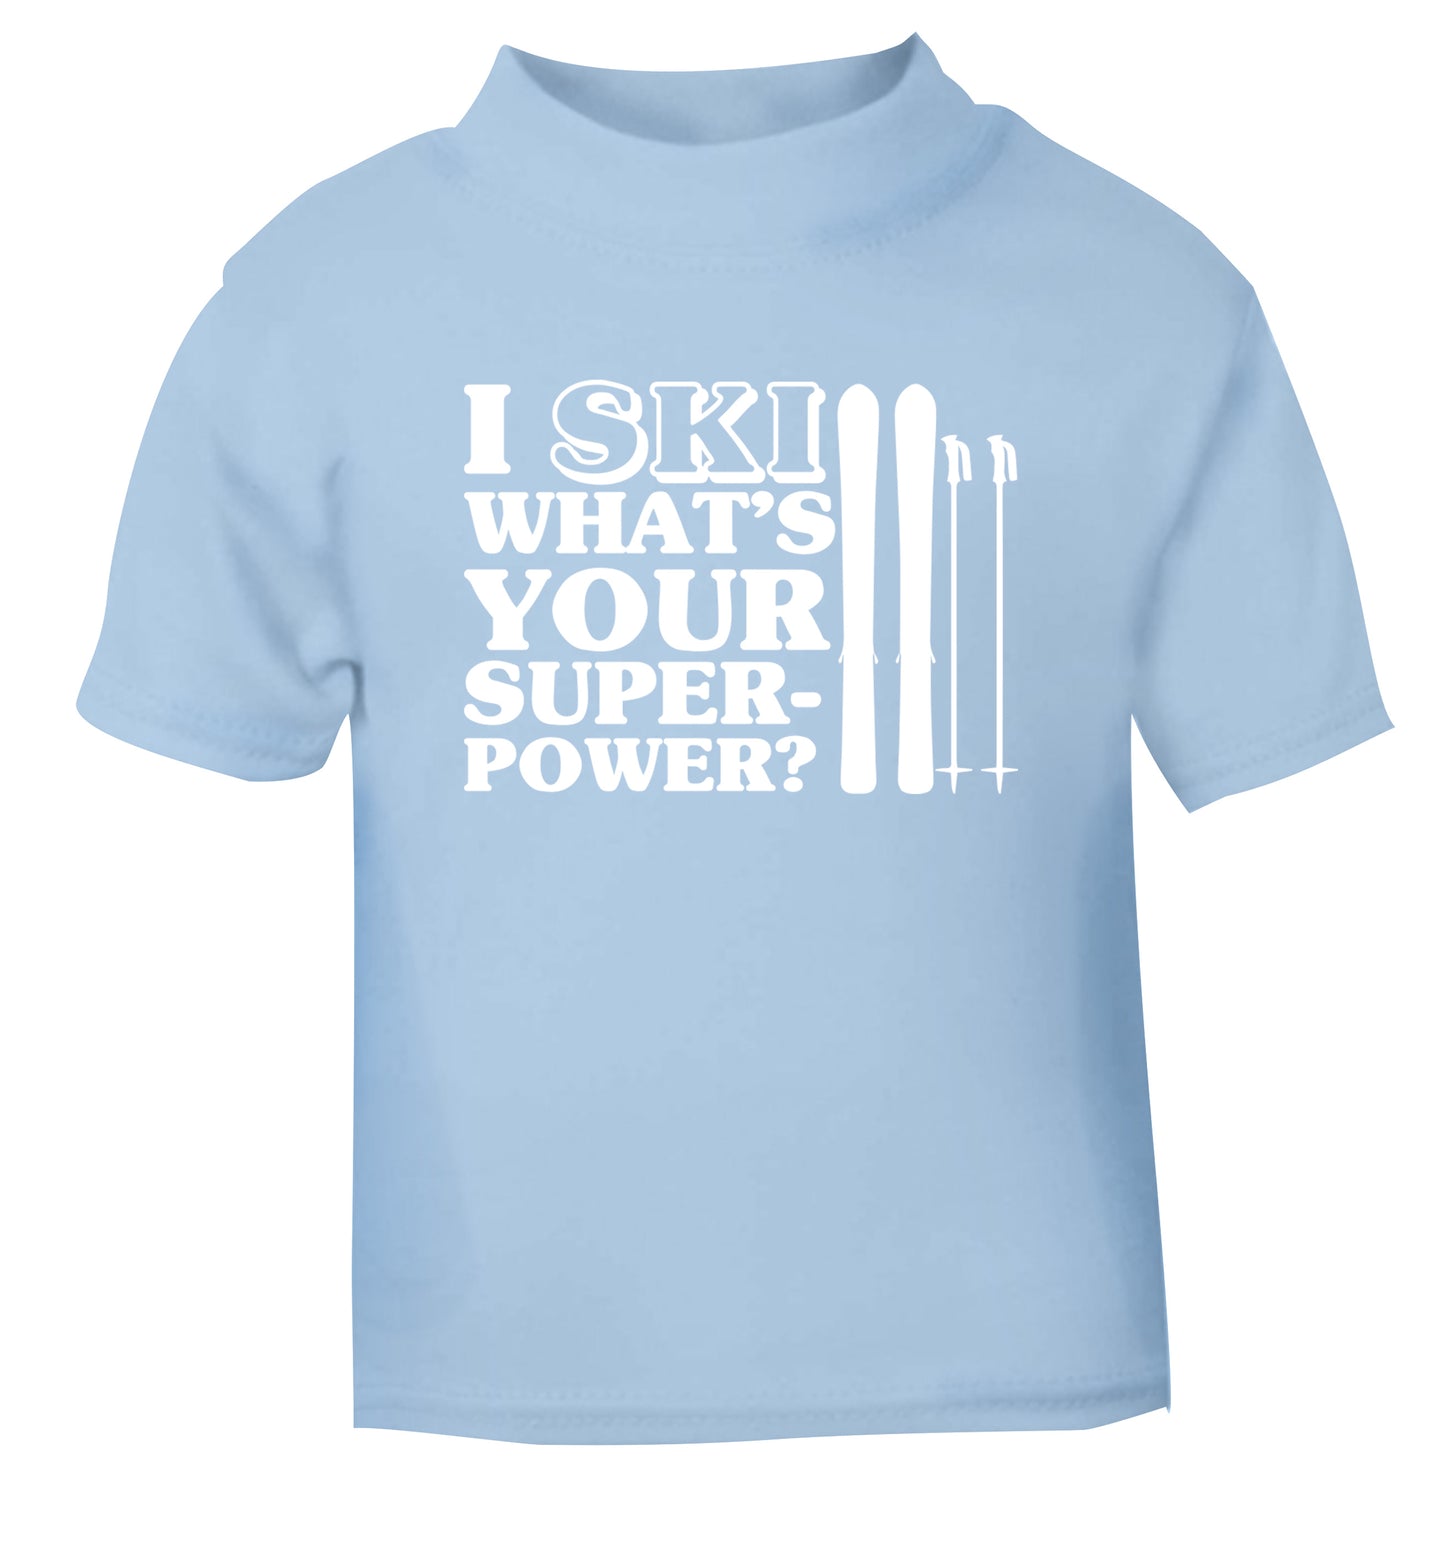 I ski what's your superpower? light blue Baby Toddler Tshirt 2 Years